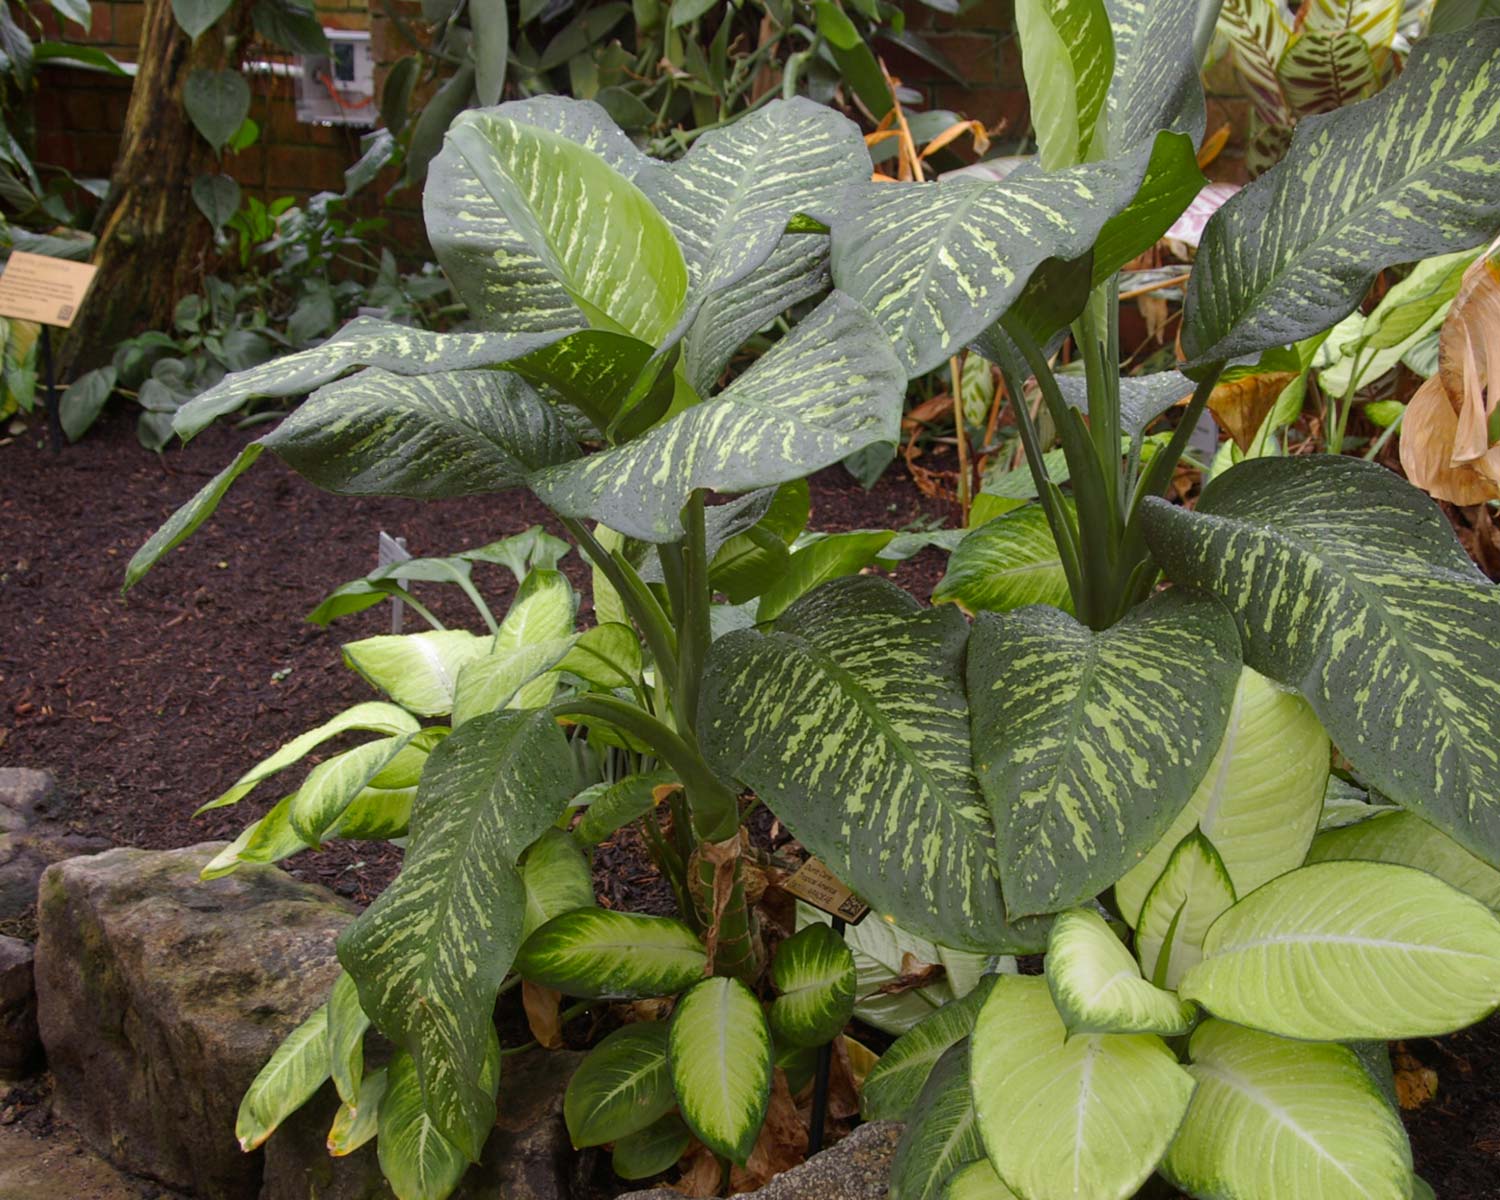 Dieffenbachia sequine or Dumb Cane - the compact nature and large attractive leaves make it  a popular house plant